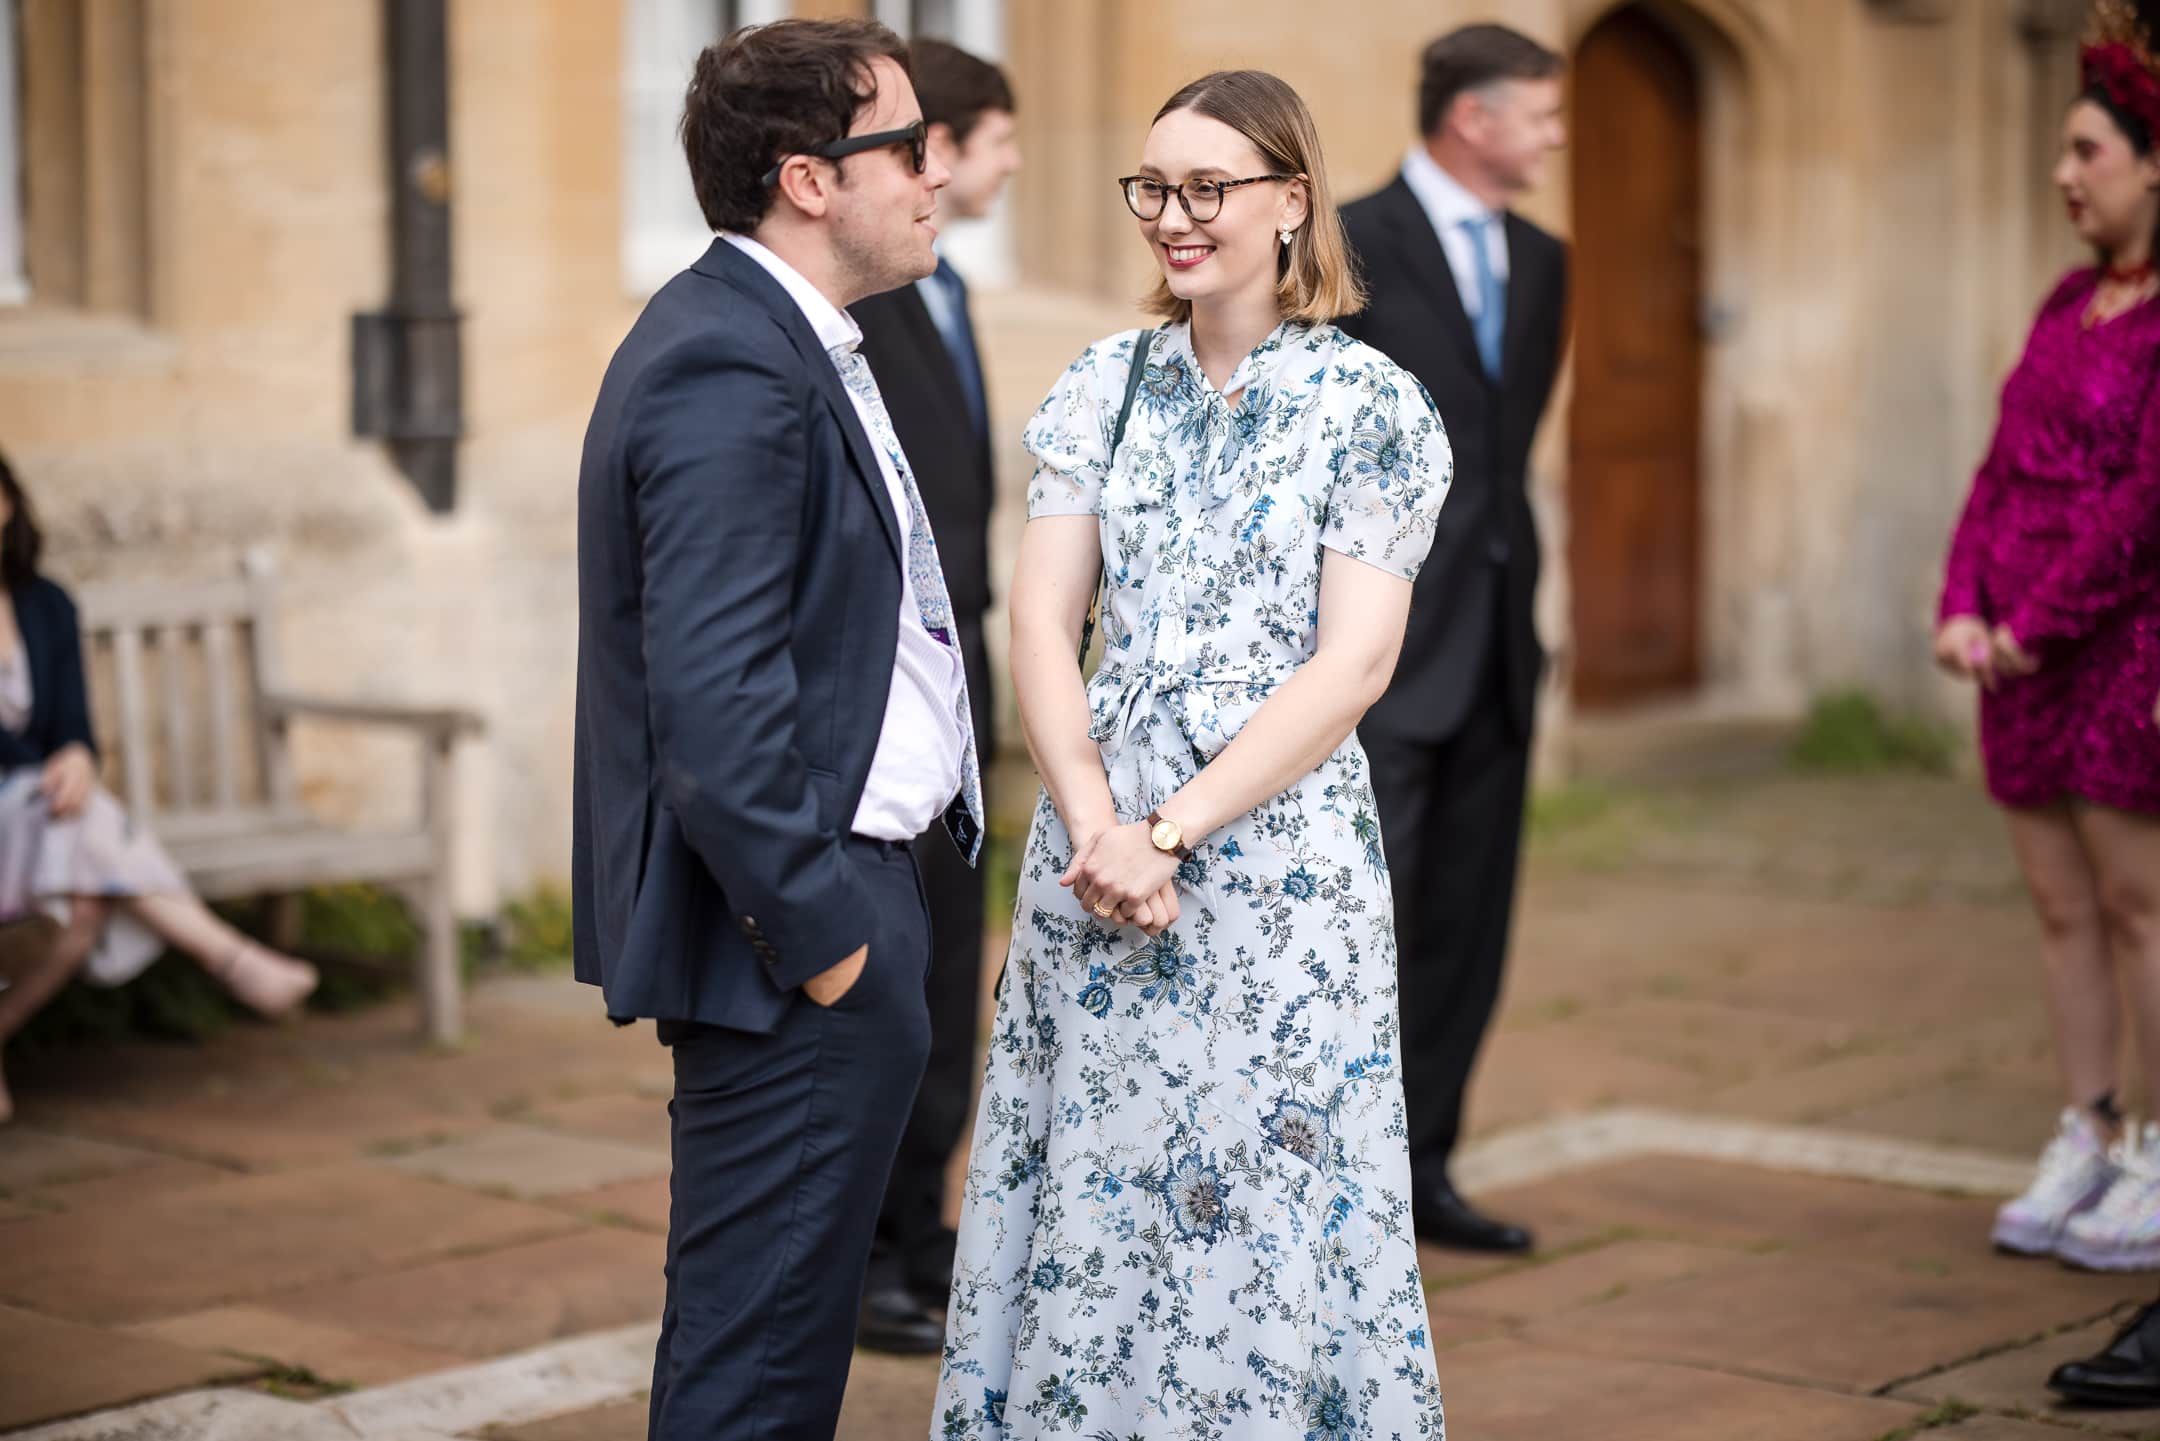 Guests talking at Corpus Christi College Oxford Wedding